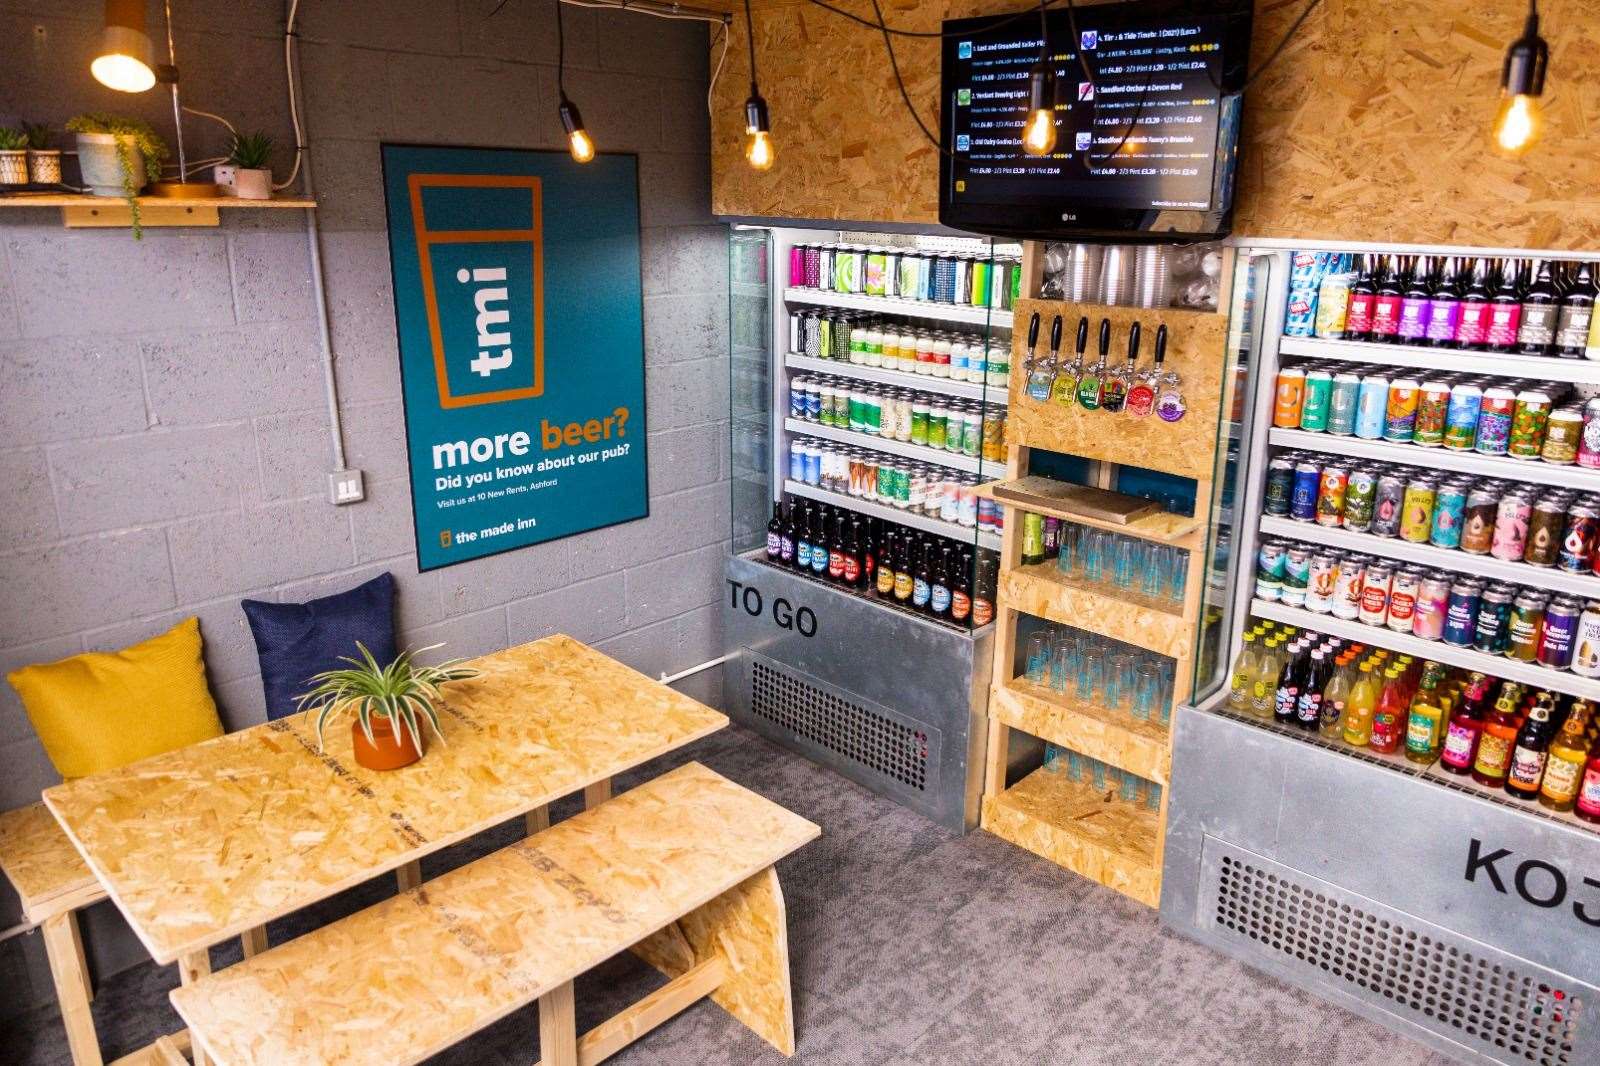 The Bottle Shop is a smaller version of the micropub which sells craft beer from bottles